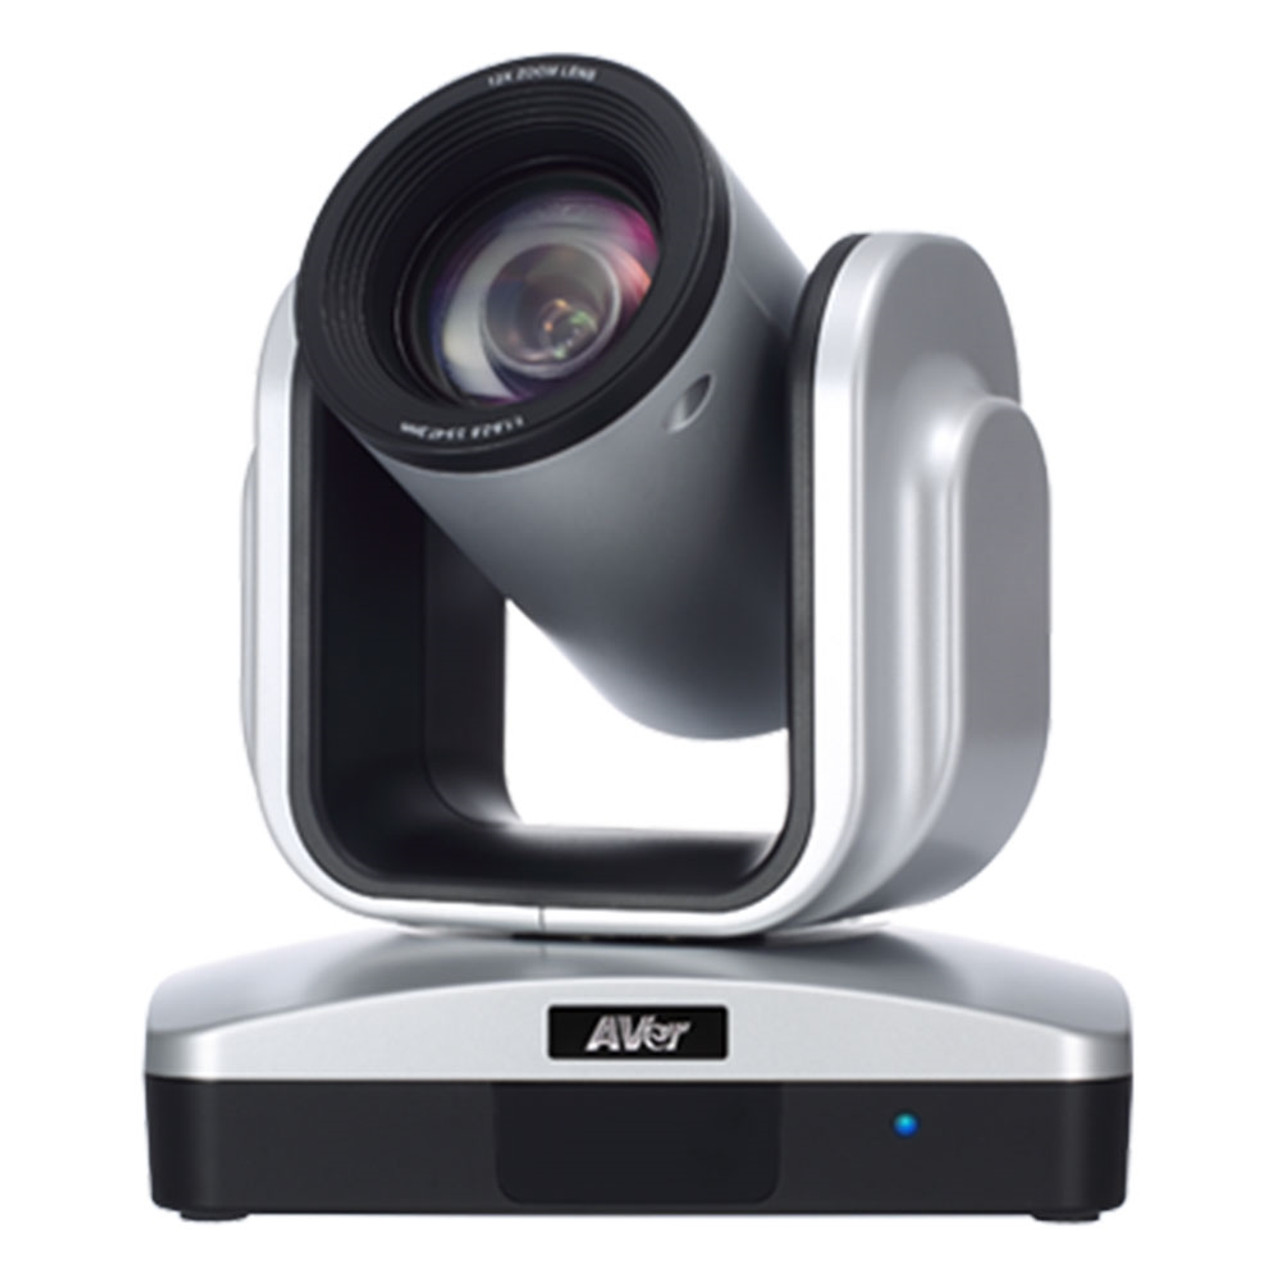 AVer VC520+ - Professional Camera for Video Collaboration in